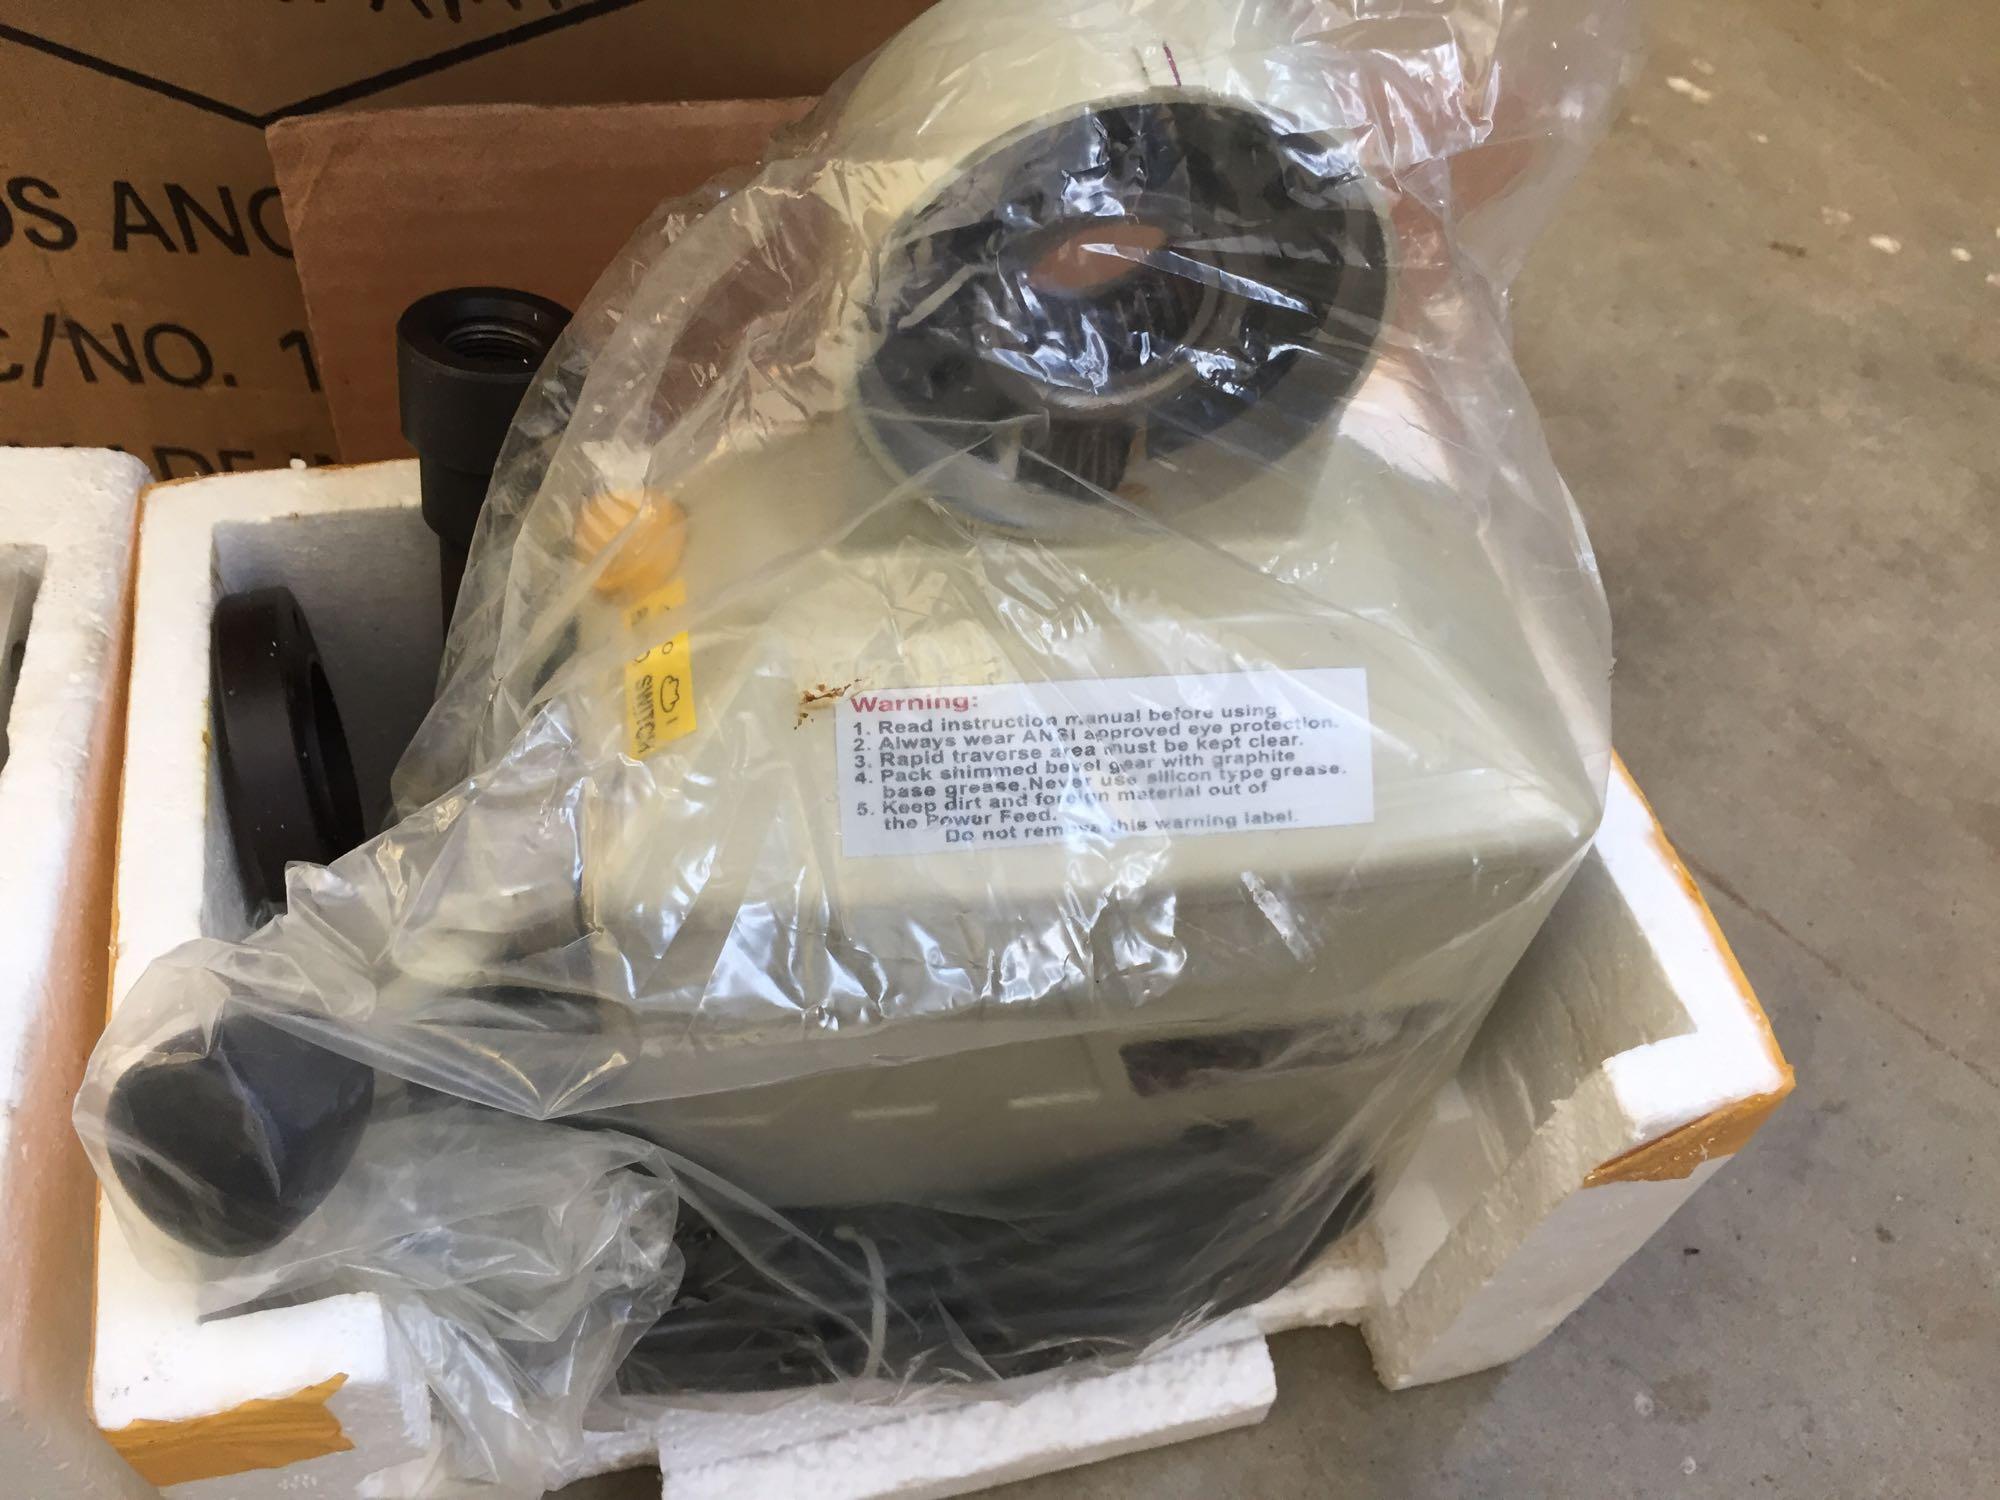 ASONG AS-250 X-Axis 150lb Power Feed, Looks New in Box